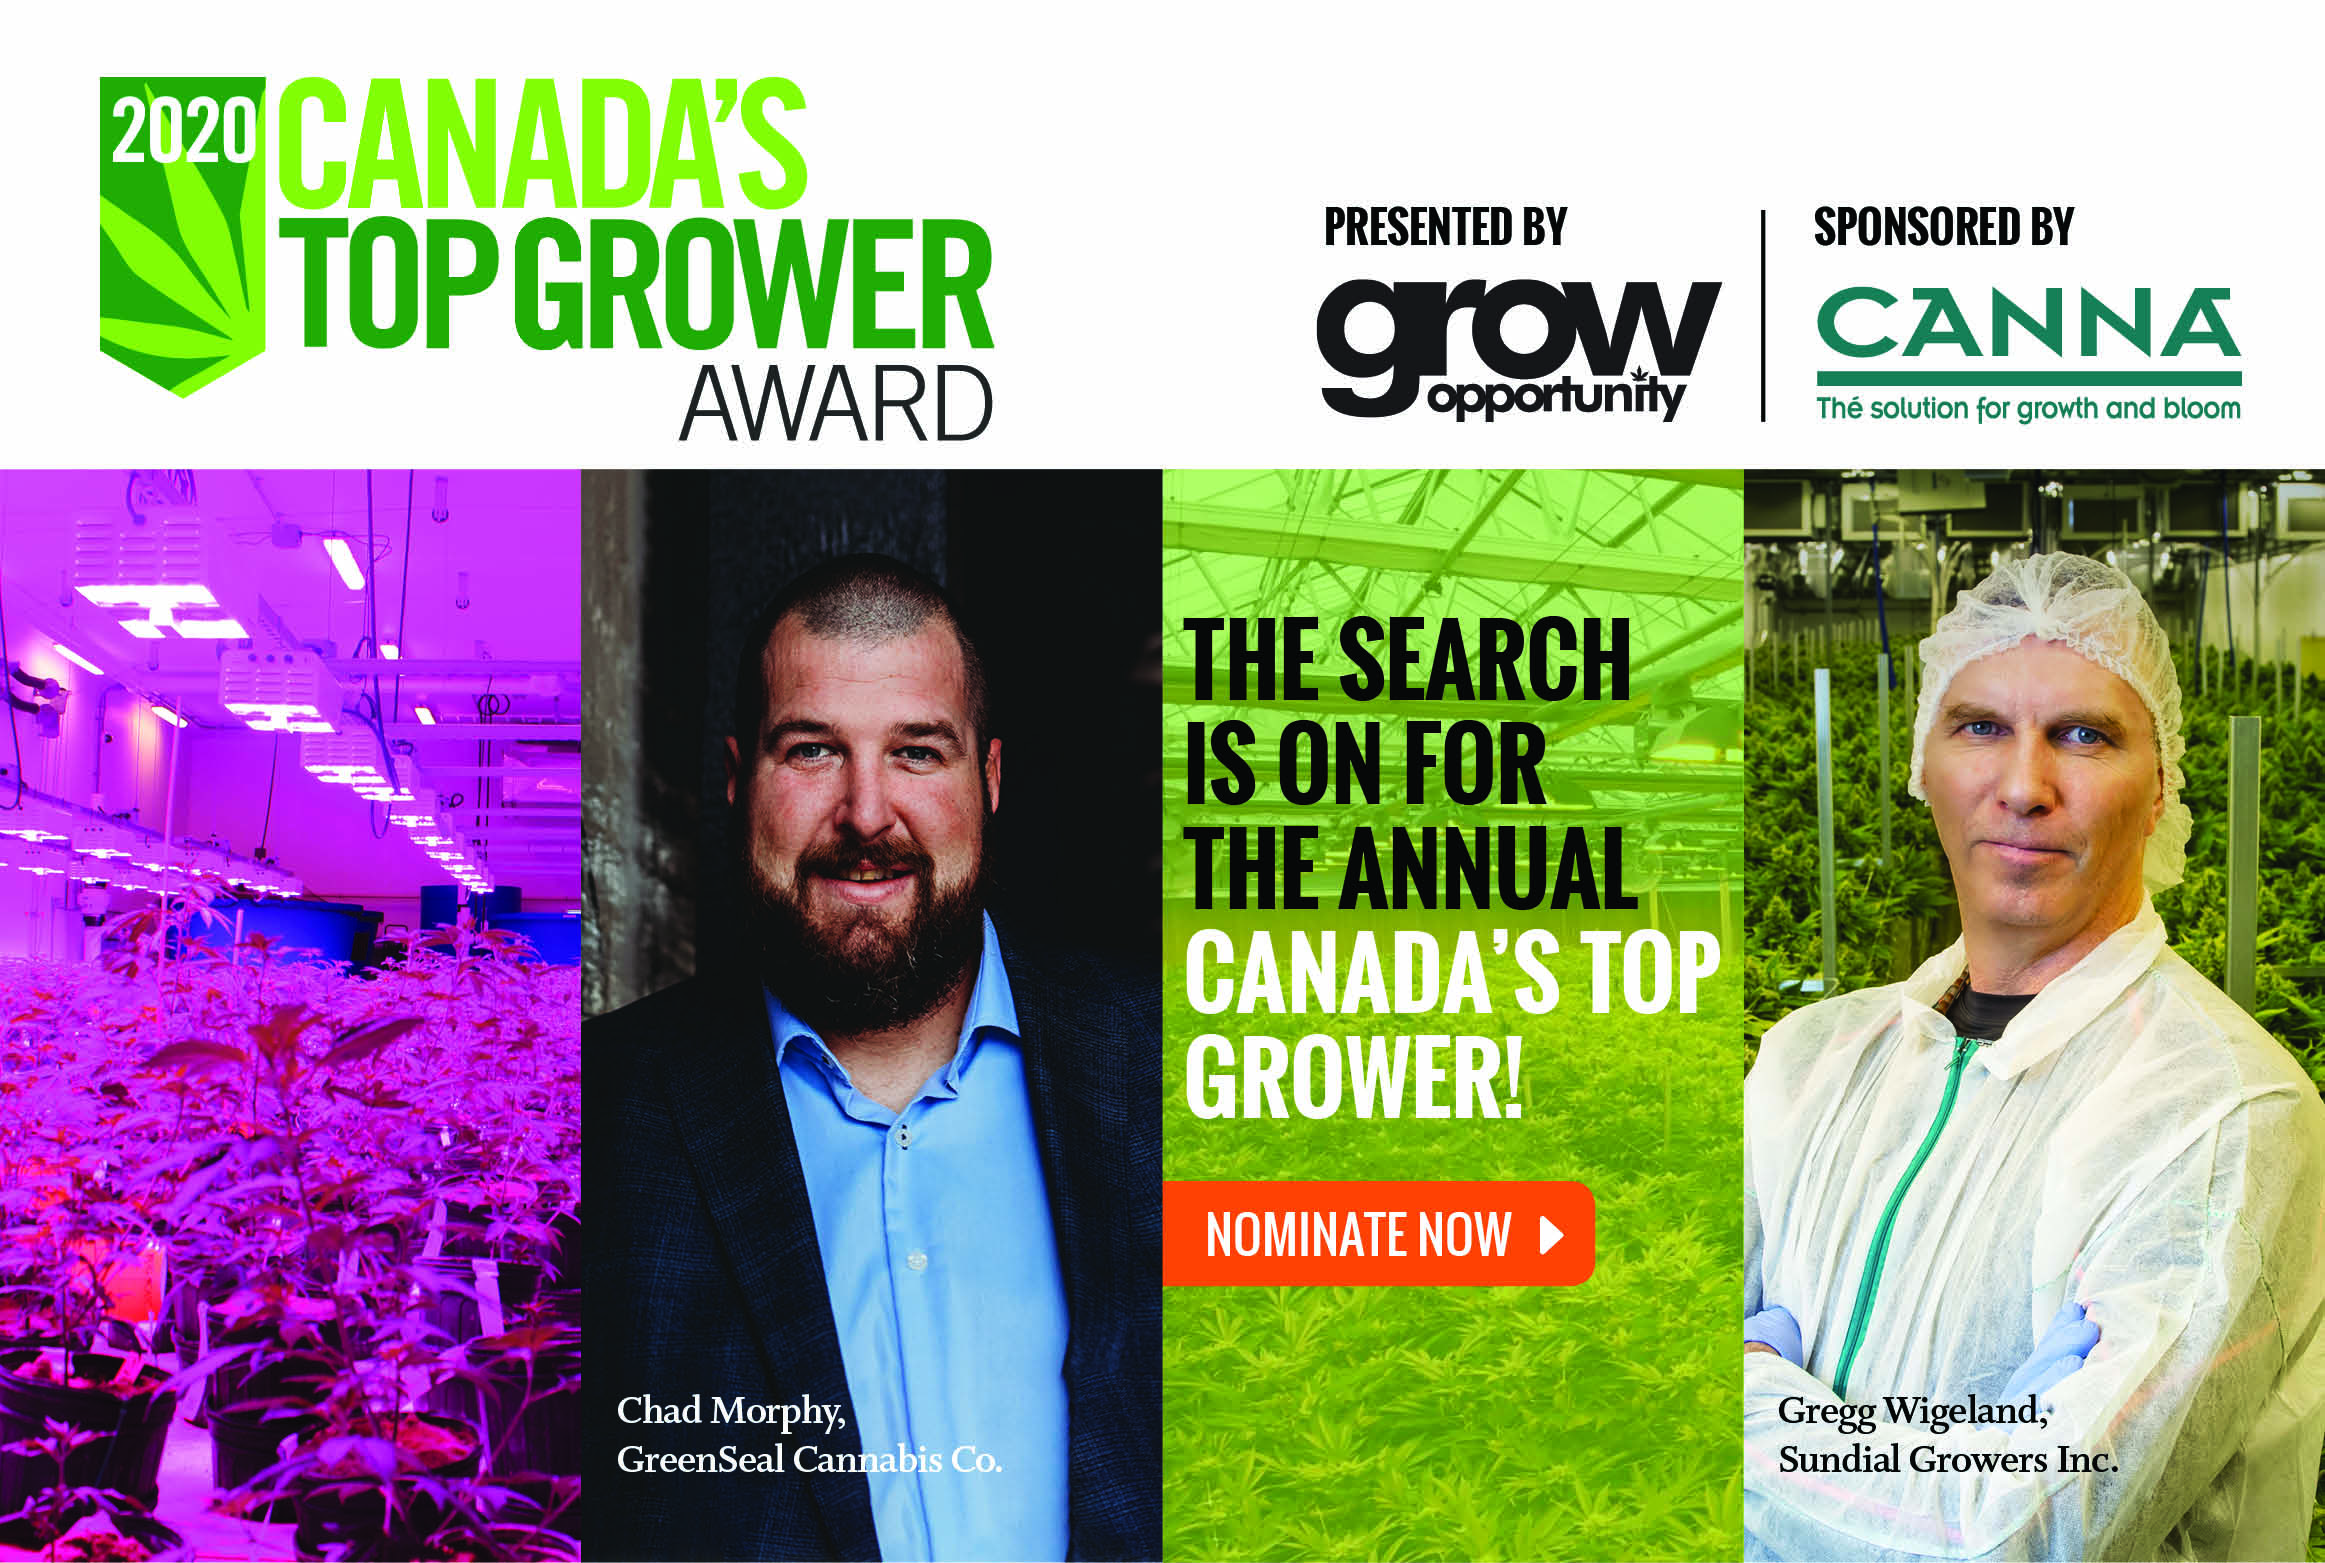 <center>The search is on for the 2020 Canada’s Top Grower!</center>